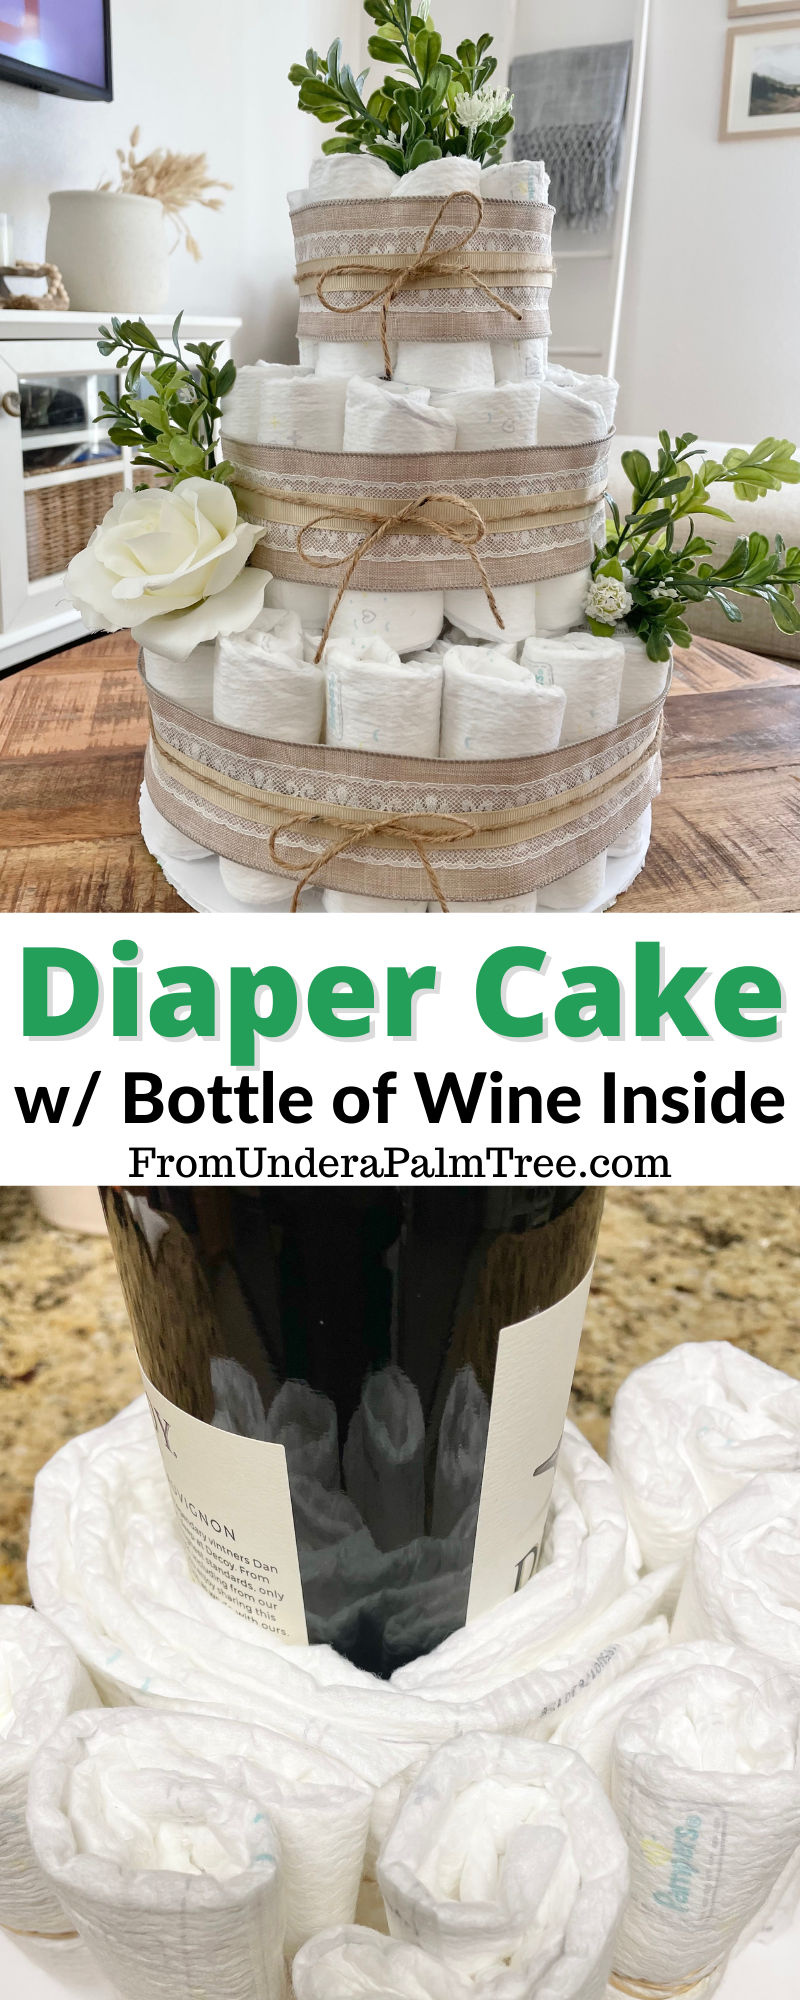 diaper cake | DIY diaper cake | diaper cake tutorial | how to make a diaper cake | gender neutral diaper cake | DIY baby shower gifts | baby shower gift | baby shower gift ideas | baby shower decor | gender neutral baby shower decor | baby boy diaper cake | baby boy shower decor | baby girl shower decor | floral diaper cake | rustic diaper cake | rustic baby shower decor | farmhouse baby shower decor | step by step diaper cake | diaper cake with a bottle of wine inside | wine bottle diaper cake | diaper cake surprise |